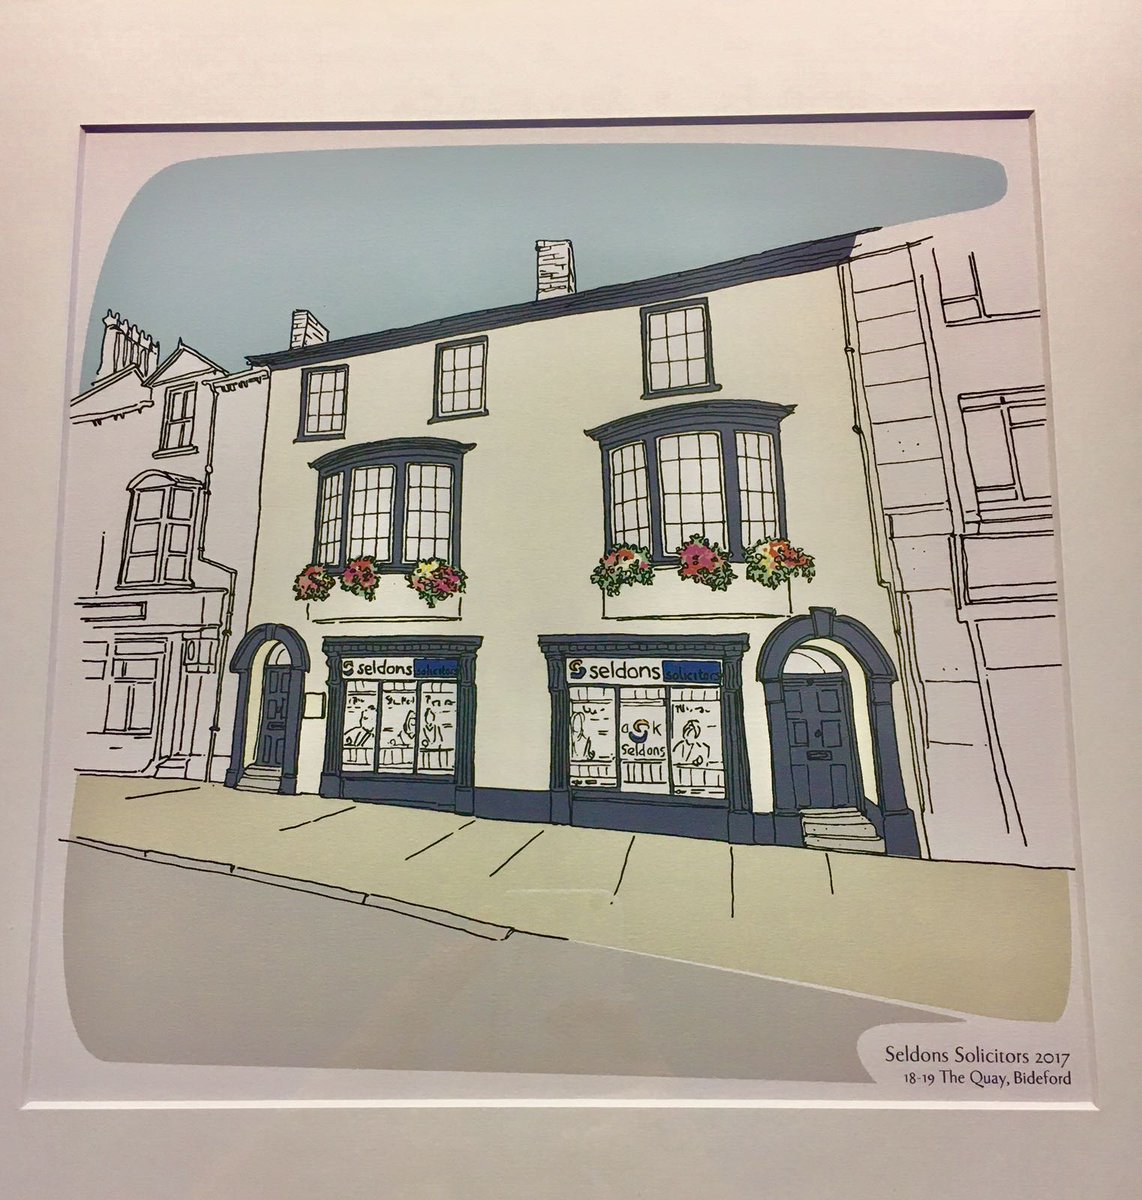 #thankyou to the team @Letterfest for this beautiful illustration, at their special request we have made a donation to #NorthDevonHospice